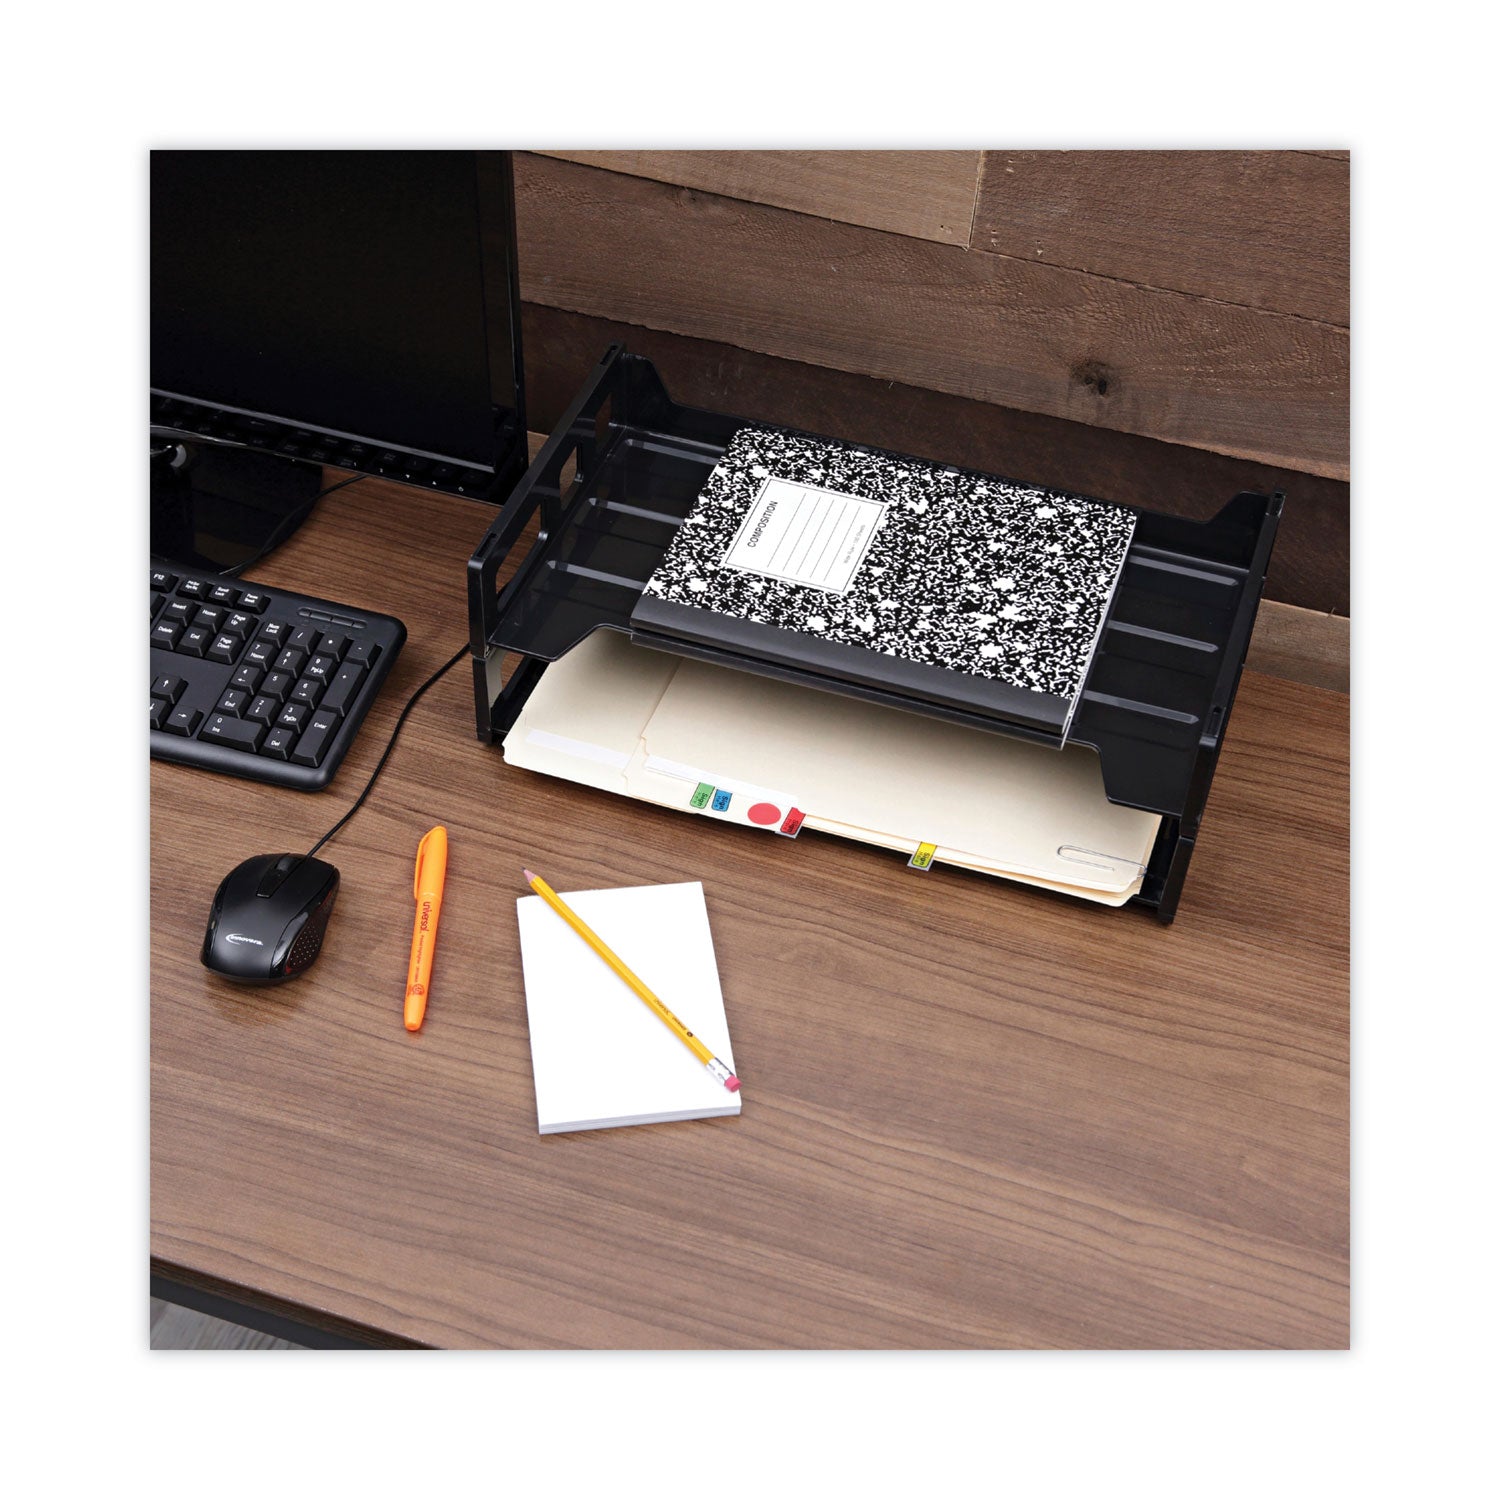 Recycled Plastic Side Load Desk Trays, 2 Sections, Legal Size Files, 16.25" x 9" x 2.75", Black - 